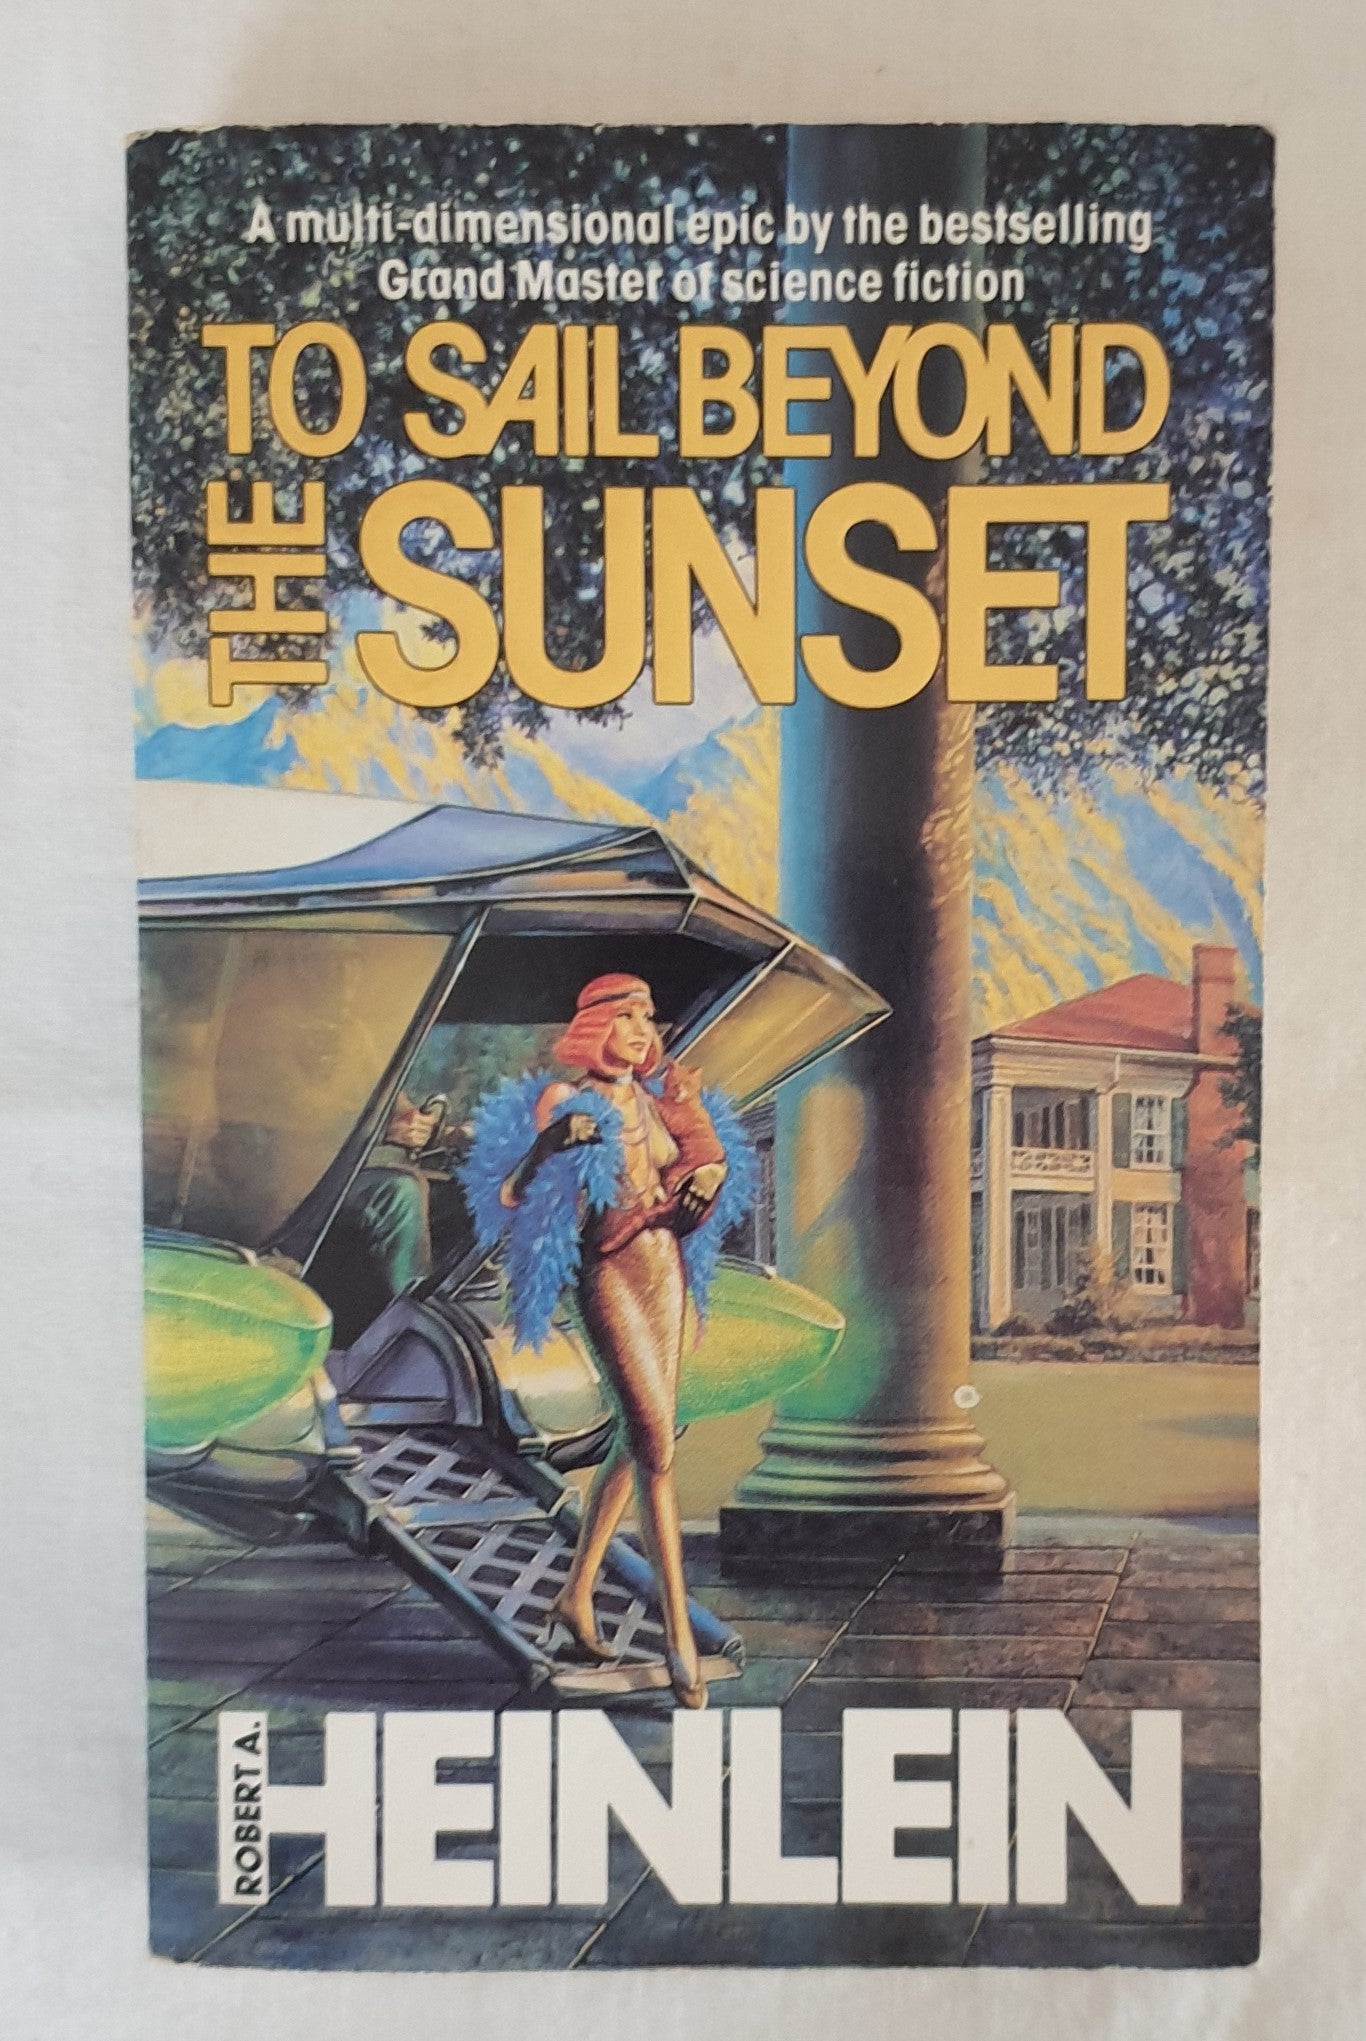 To Sail Beyond the Sunset by Robert A. Heinlein